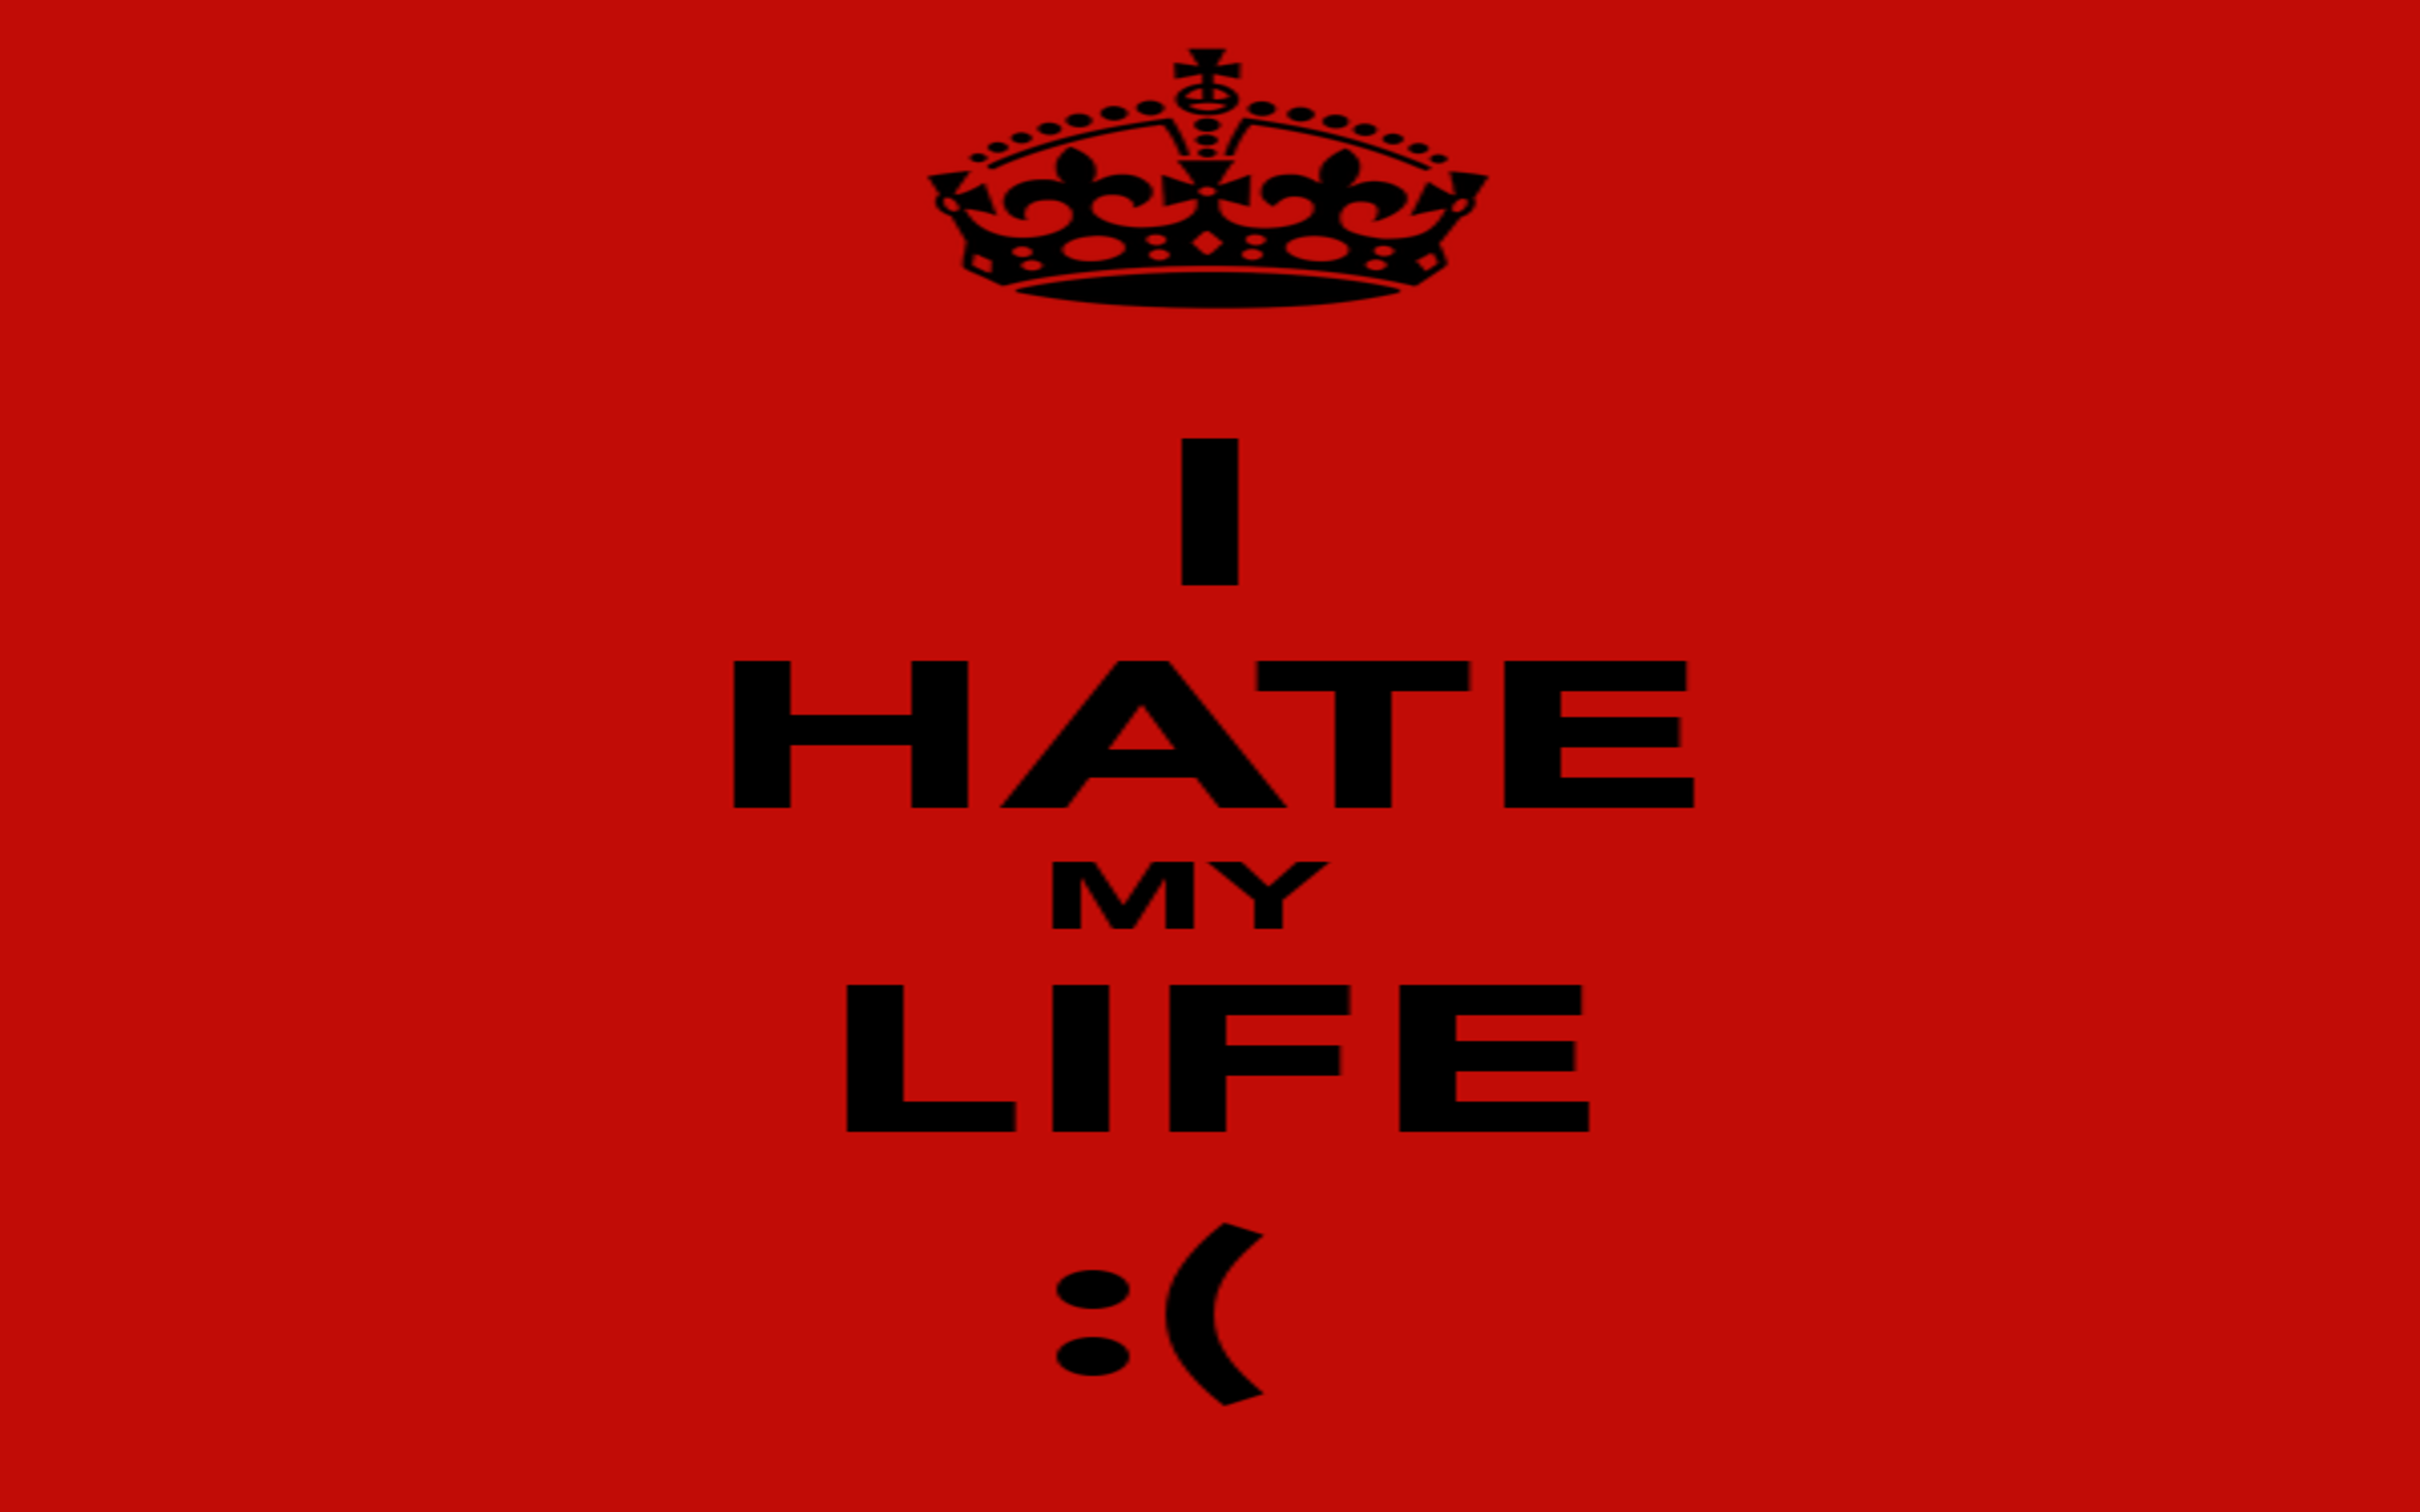 I Hate My Life wallpaper by officalHYBRID  Download on ZEDGE  a970